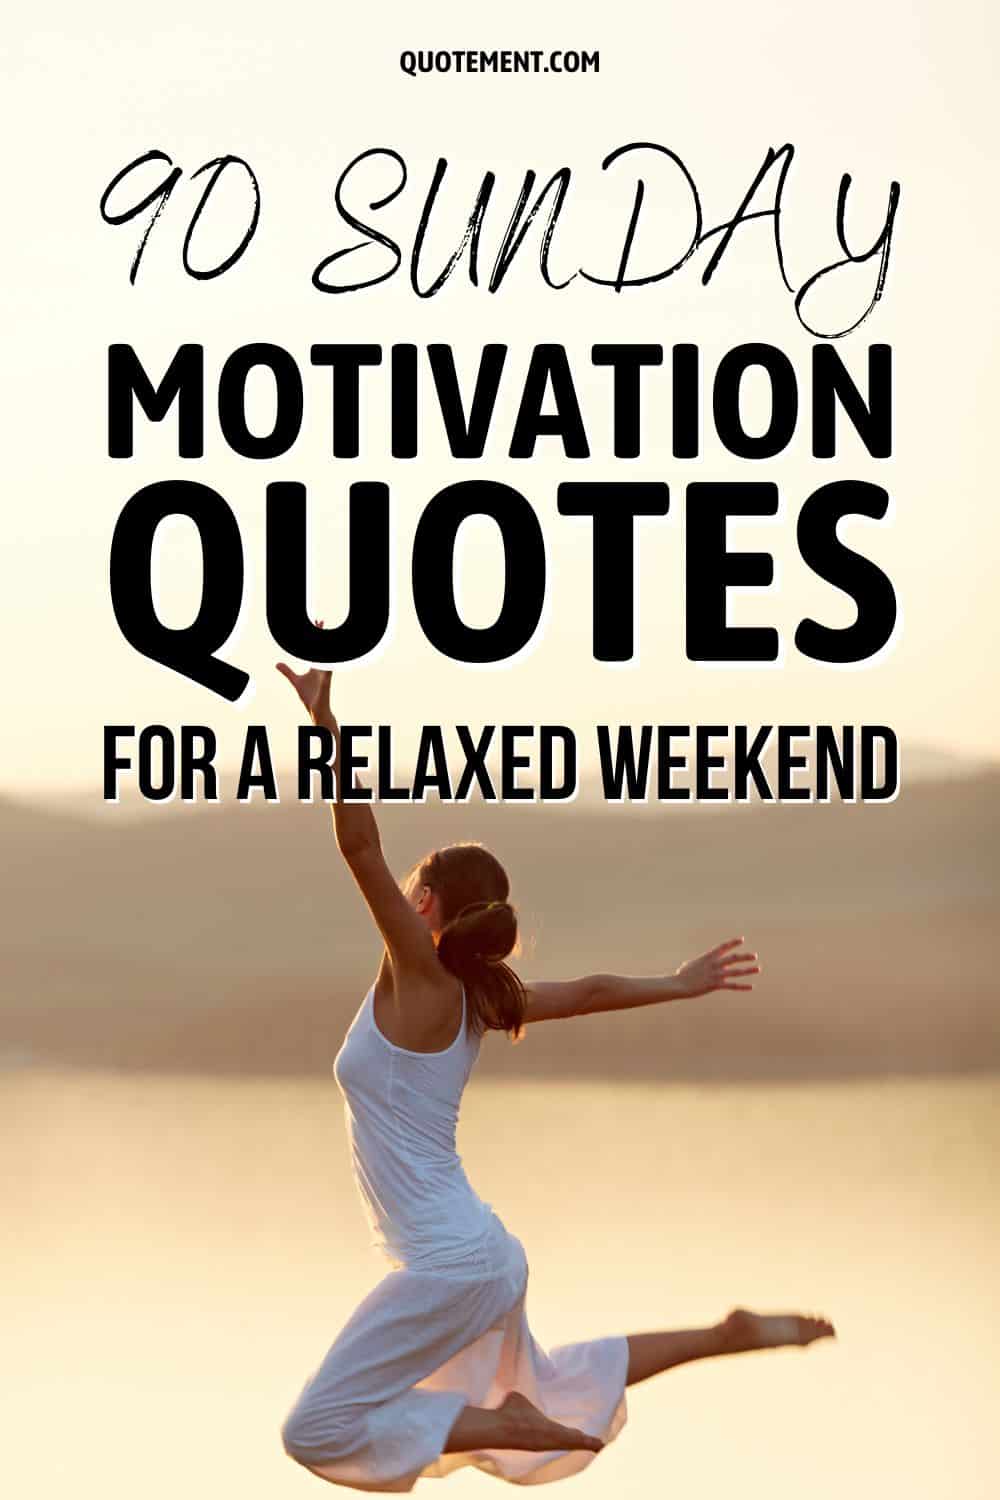 90 Sunday Motivation Quotes For A Relaxed Weekend
